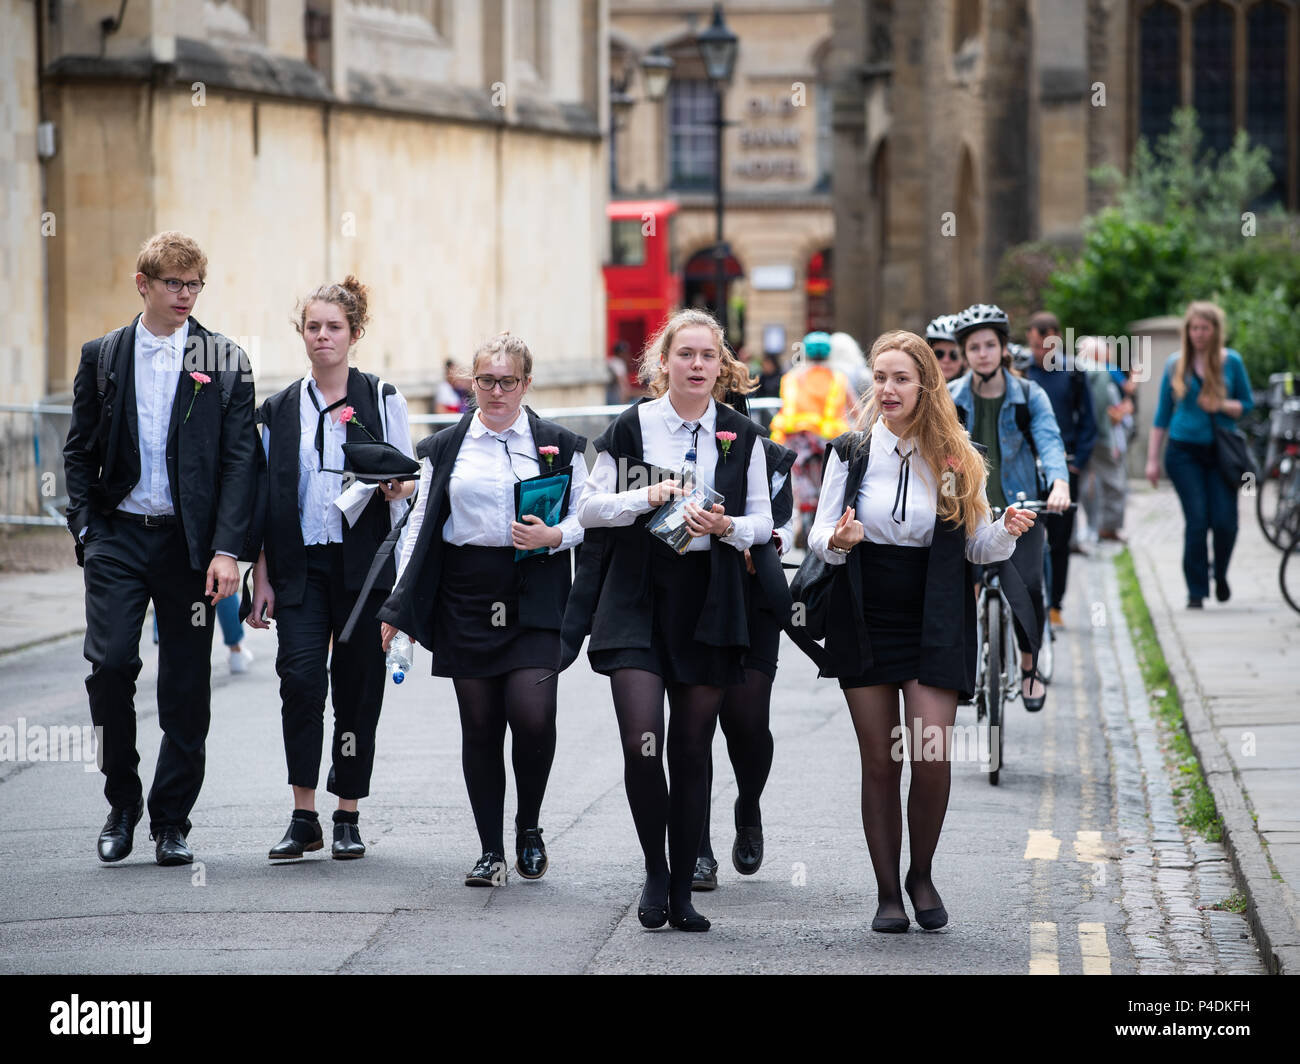 Students at Oxford University wearing tradional 'sub fusc' garments which are compulsory when taking exams. Carnations denote course year. Stock Photo